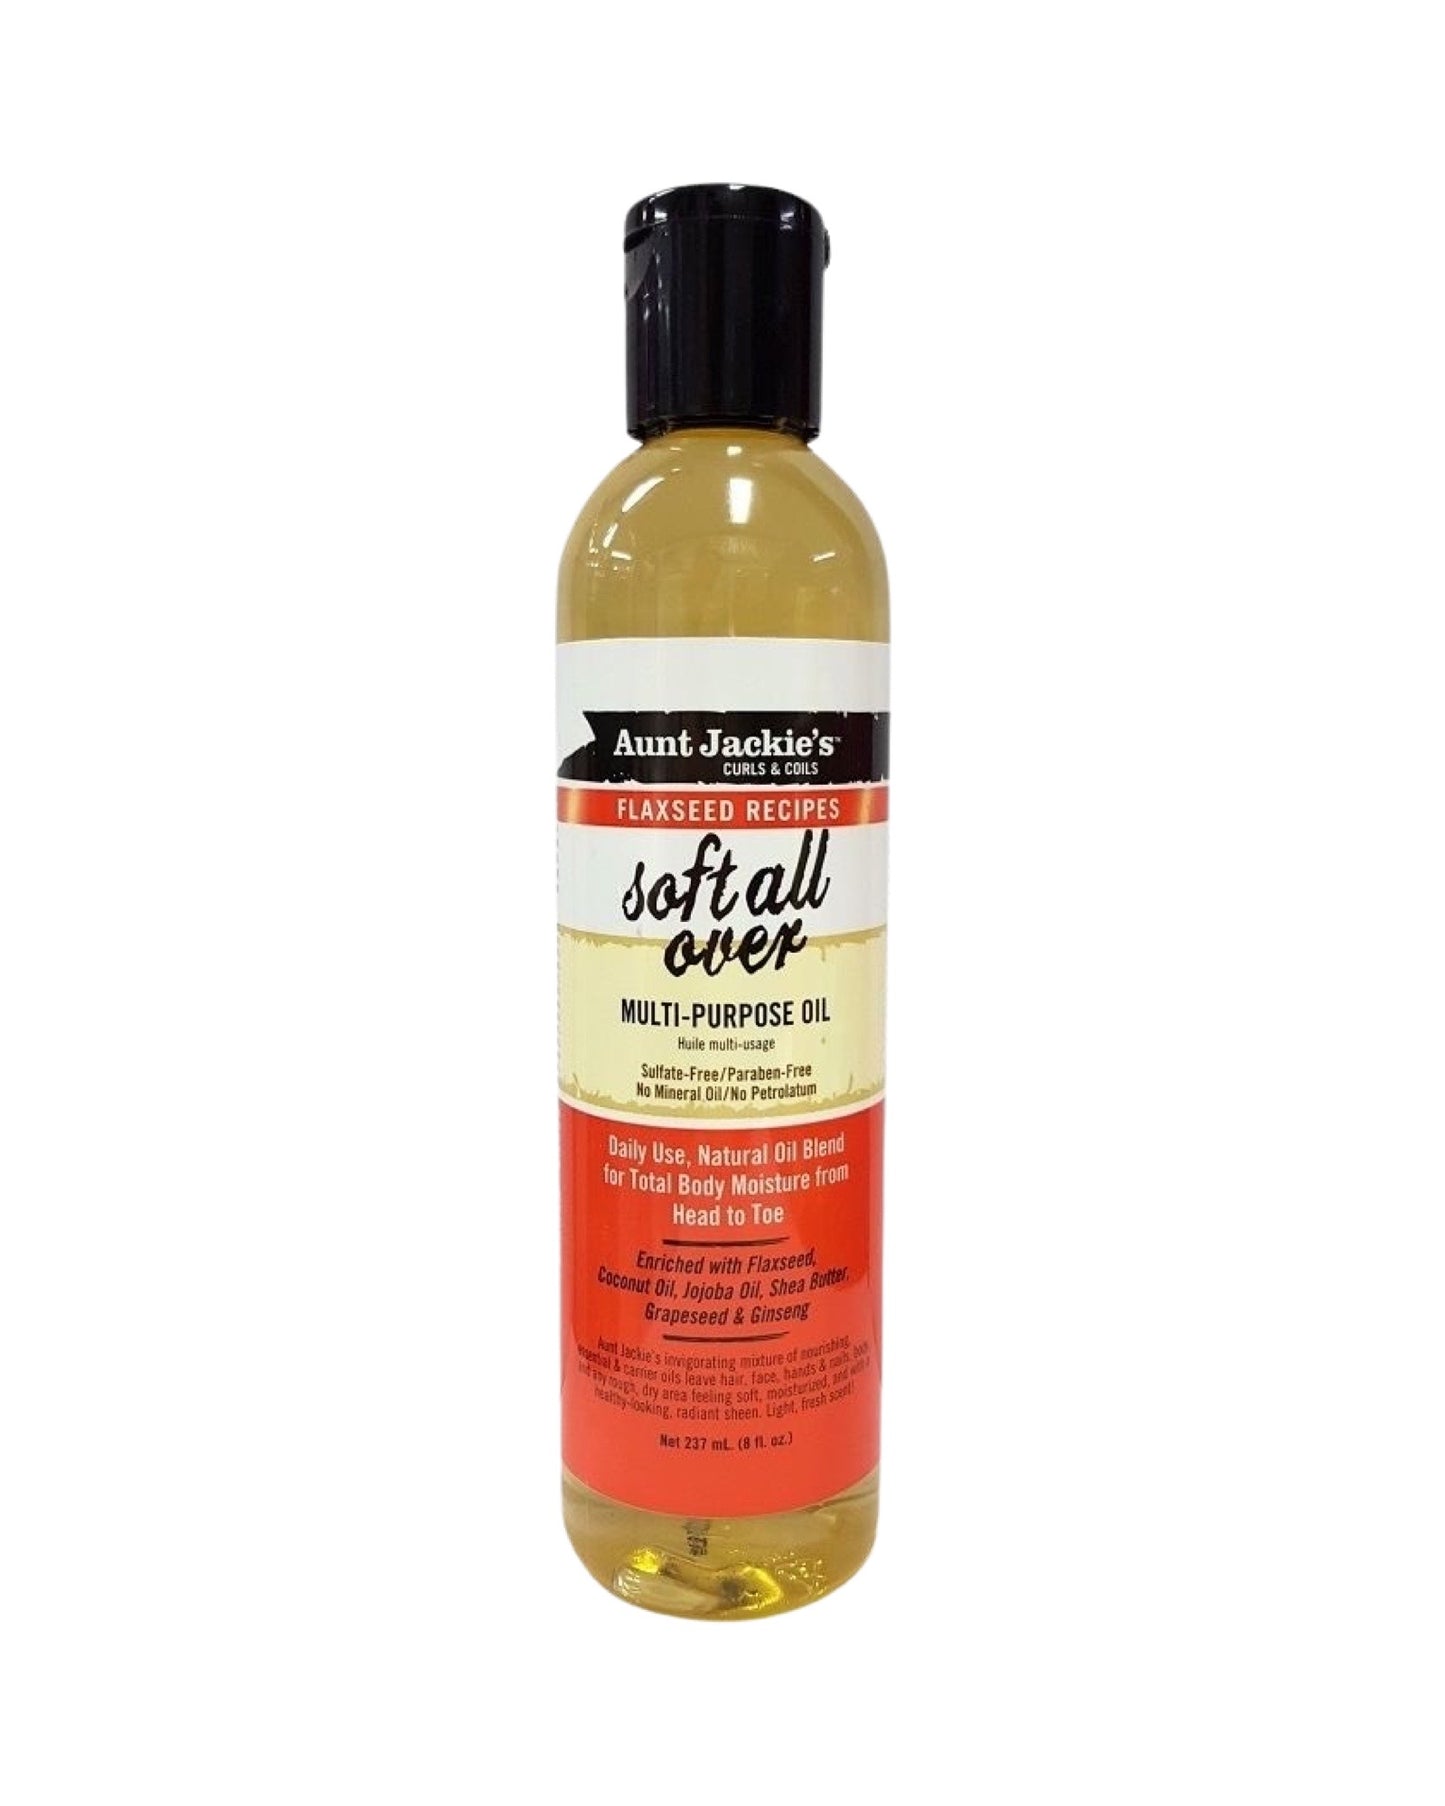 Aunt Jackie's Flaxseed Recipes soft all over Mutli Purpose Oil - 237ml/8Oz